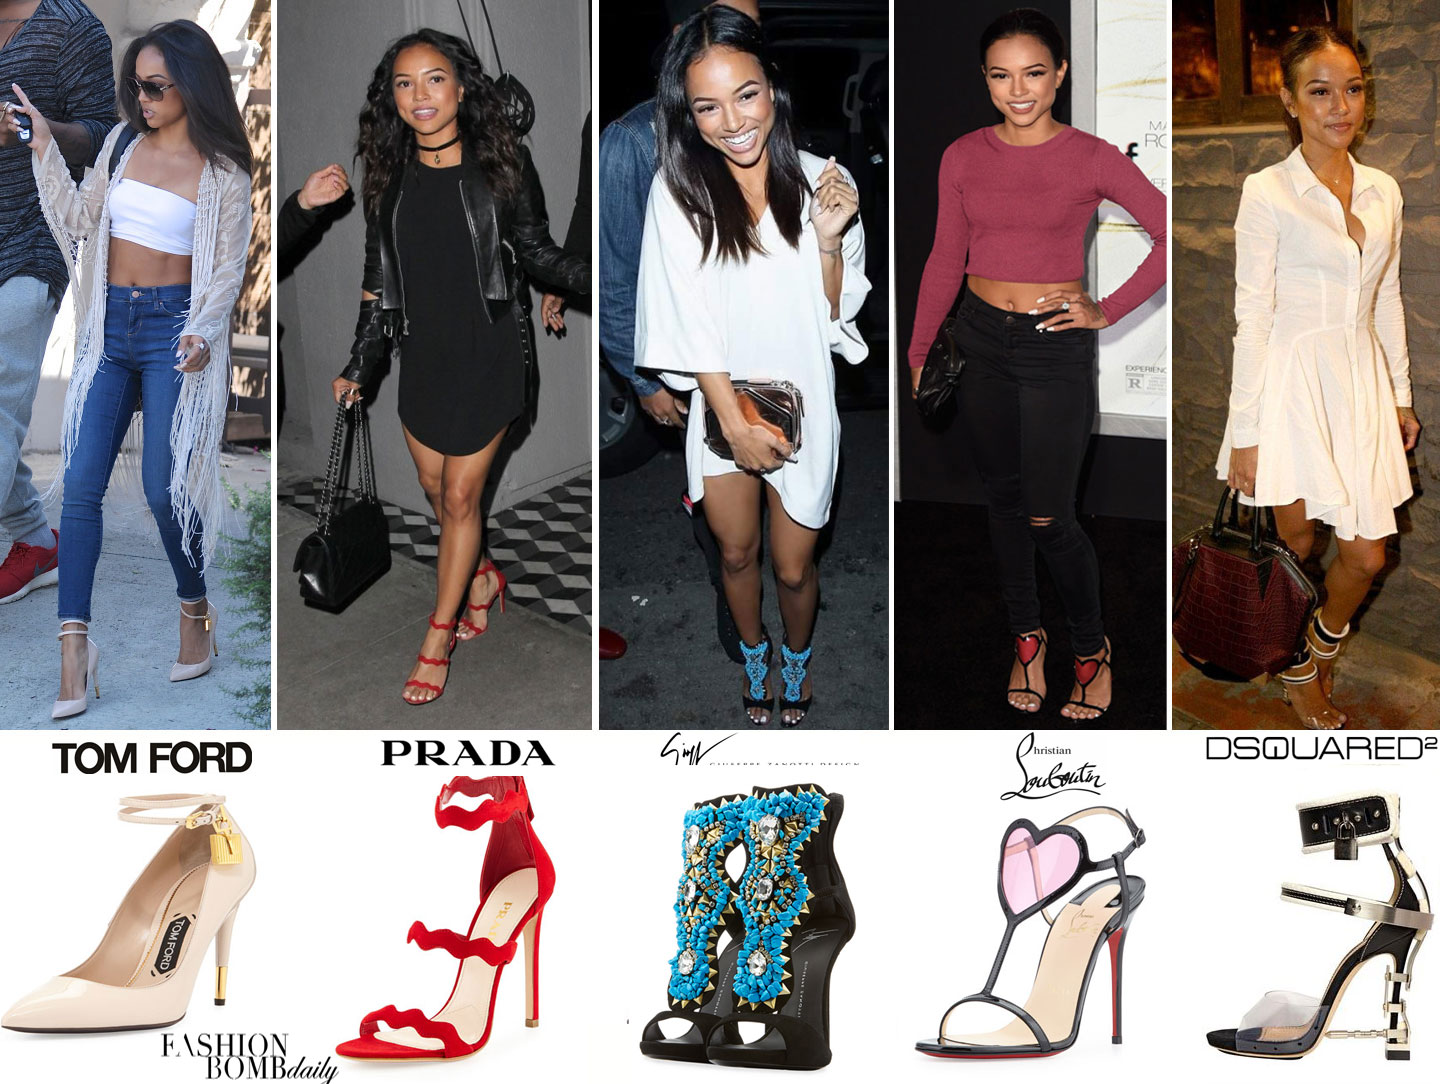 dsquared shoes evelyn lozada